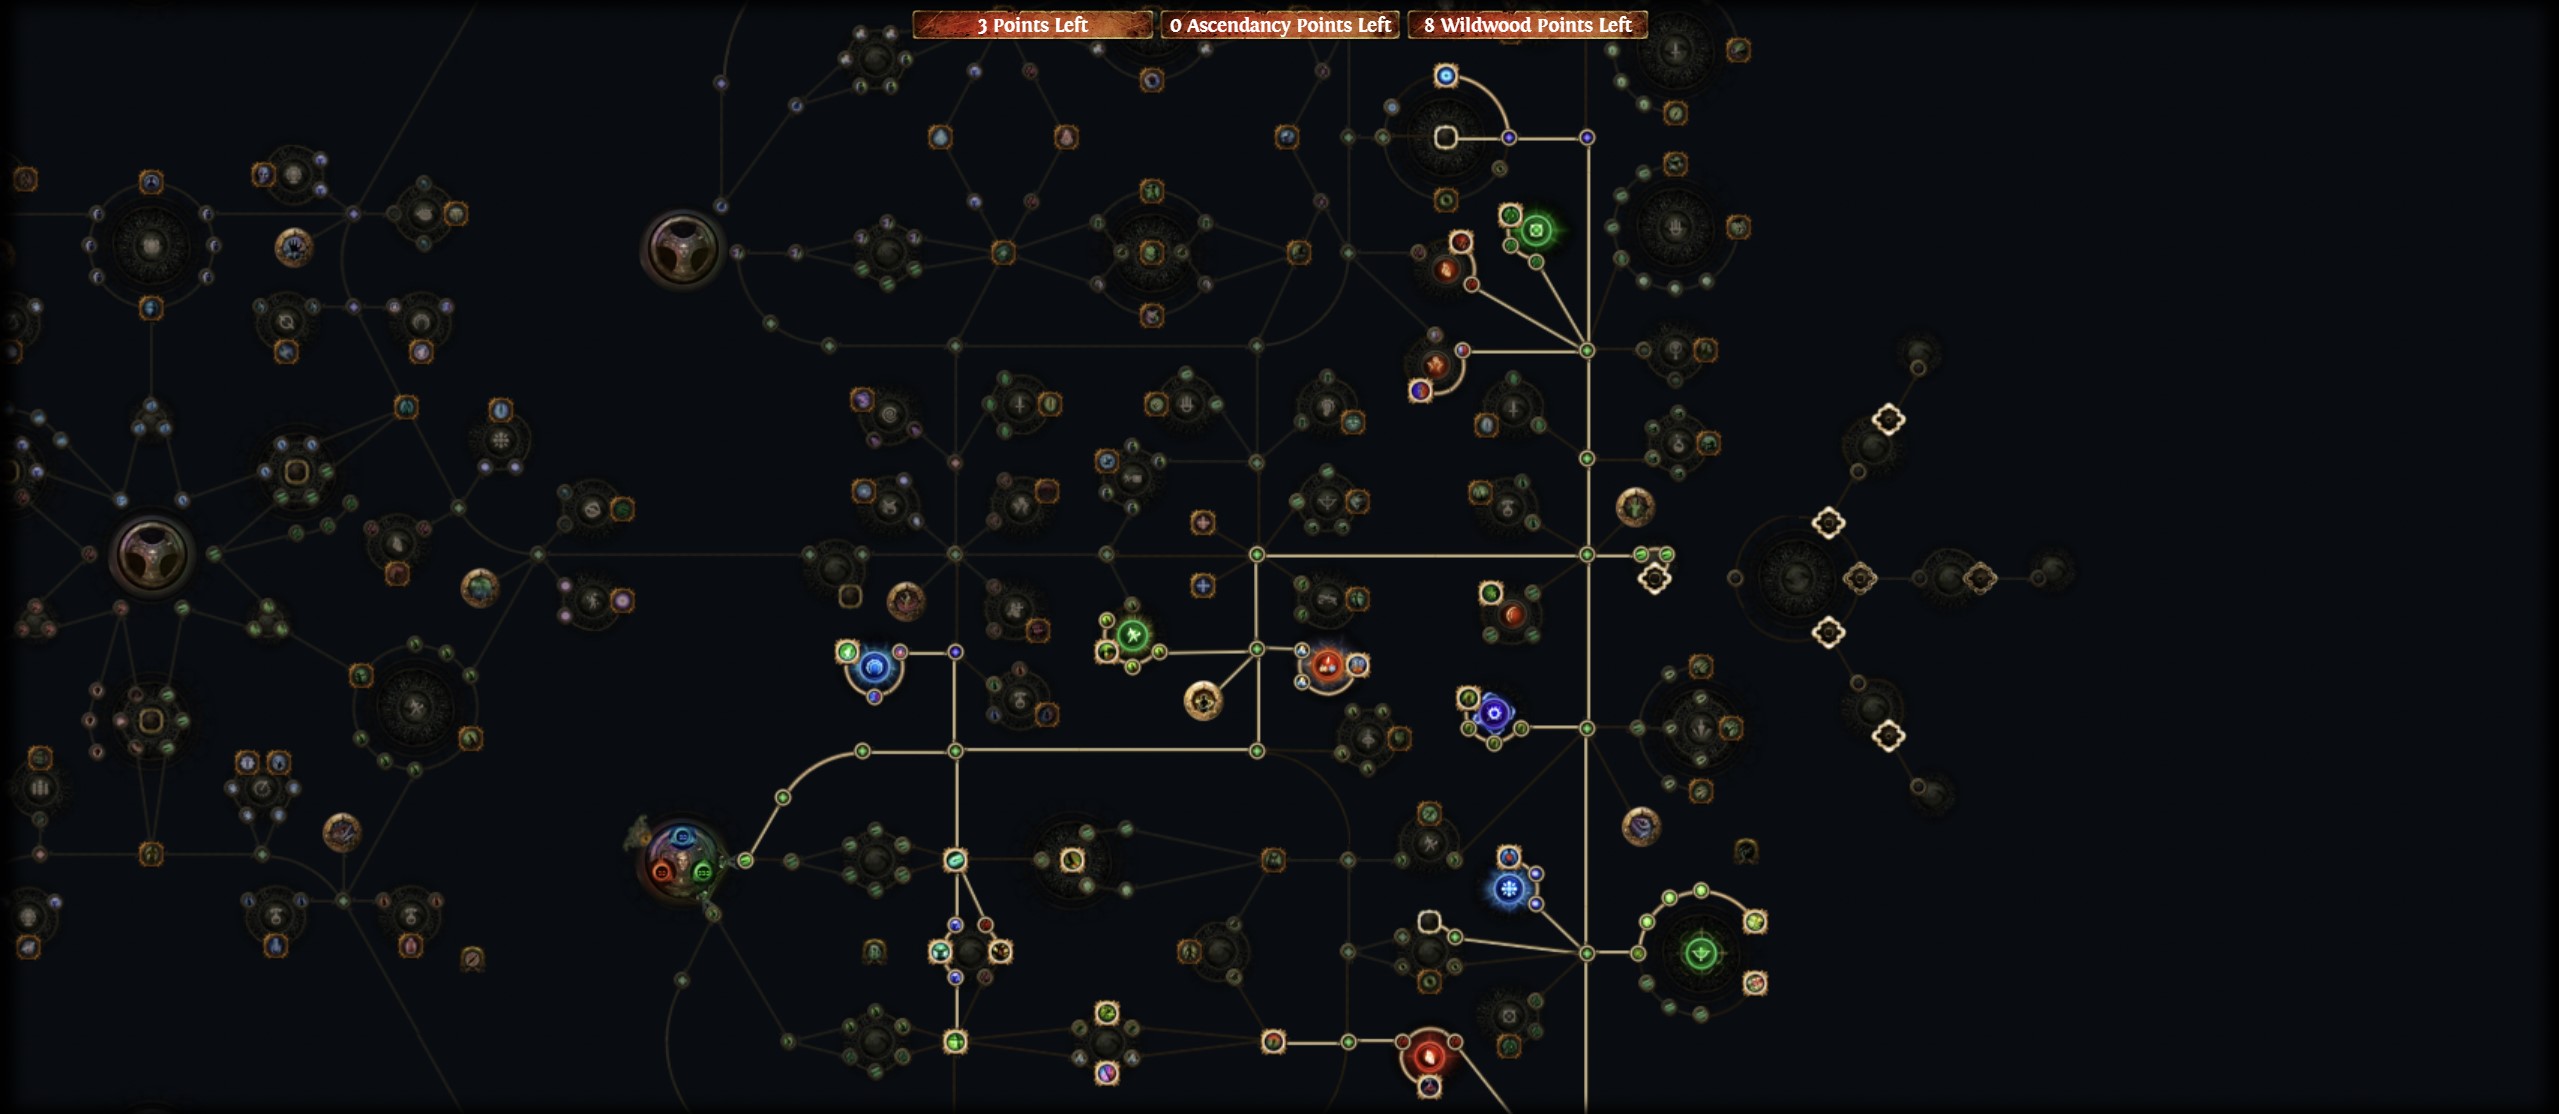 An image of the upper half of the Deadeye's preferred passive skills in Path of Exile.